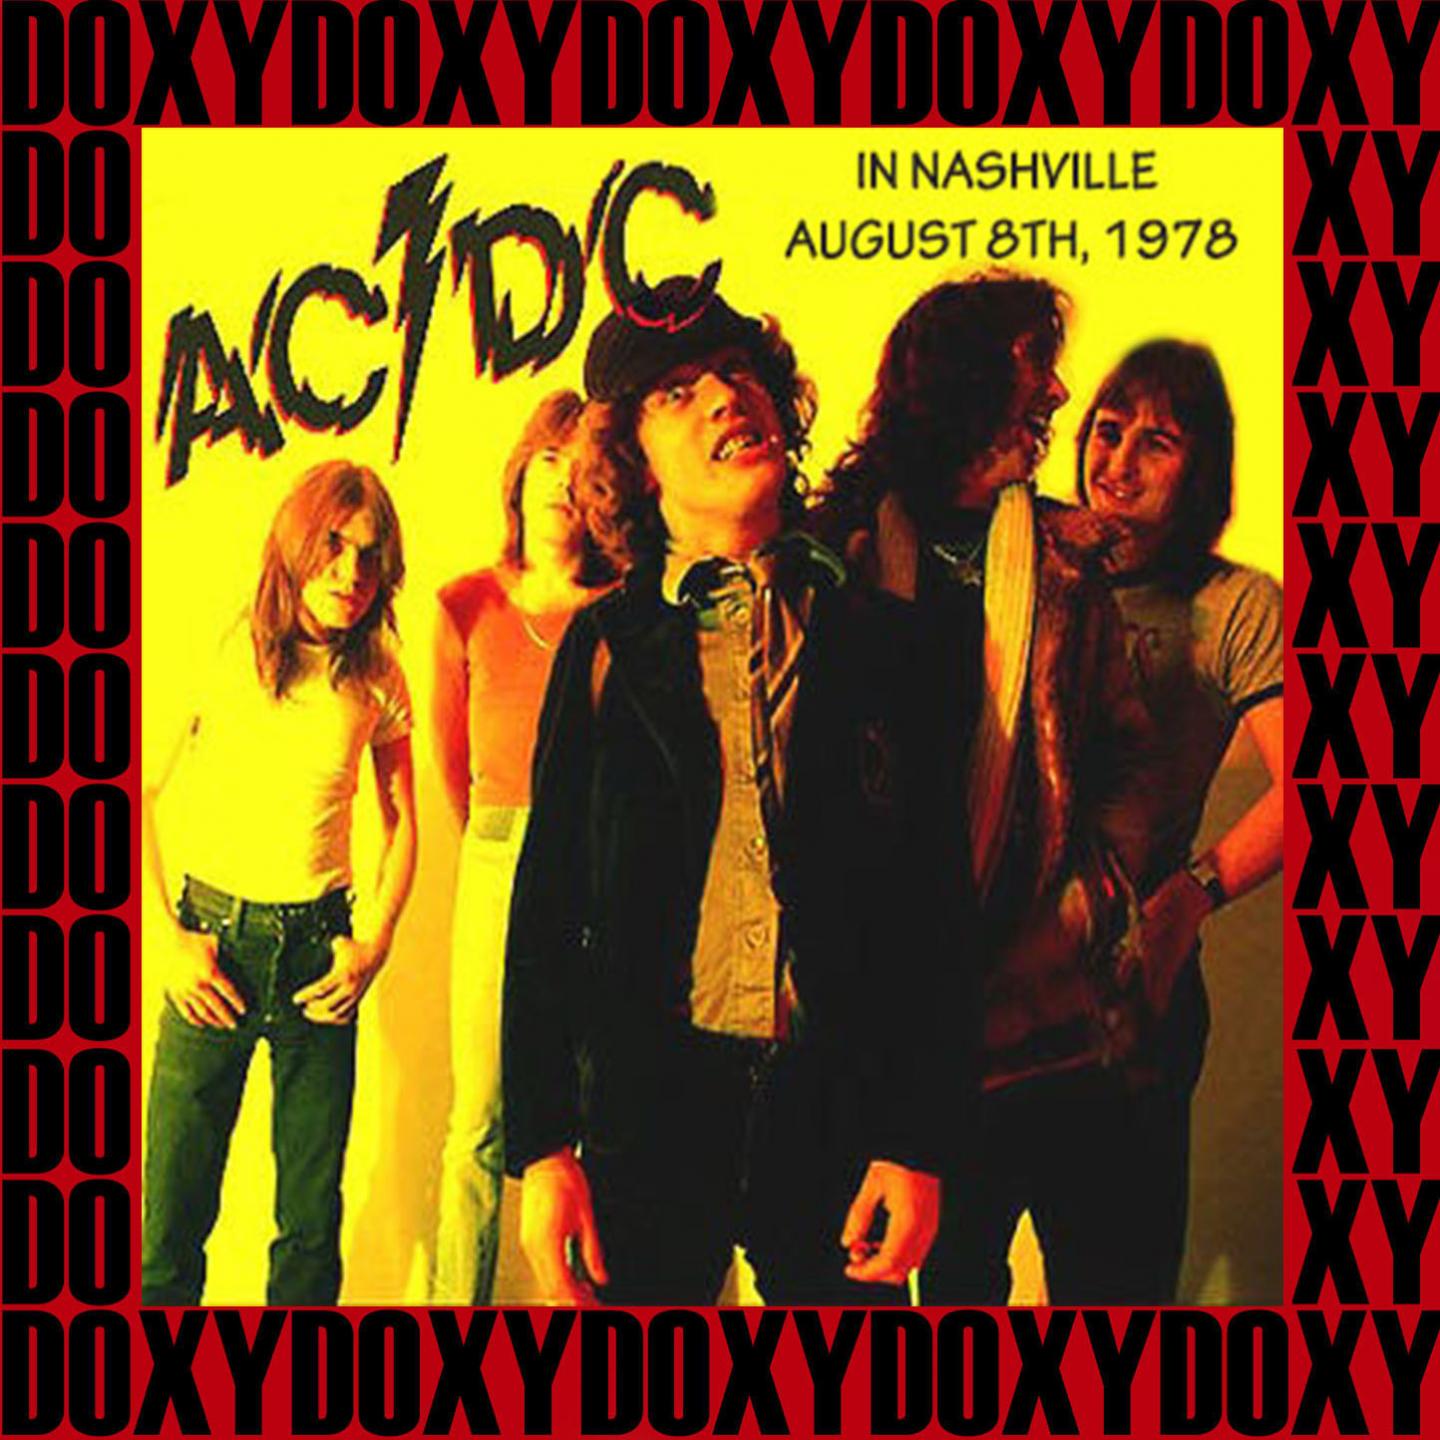 In Nashville, August 8th, 1978 (Doxy Collection, Remastered, Live On Wkdf Fm Broadcasting)专辑